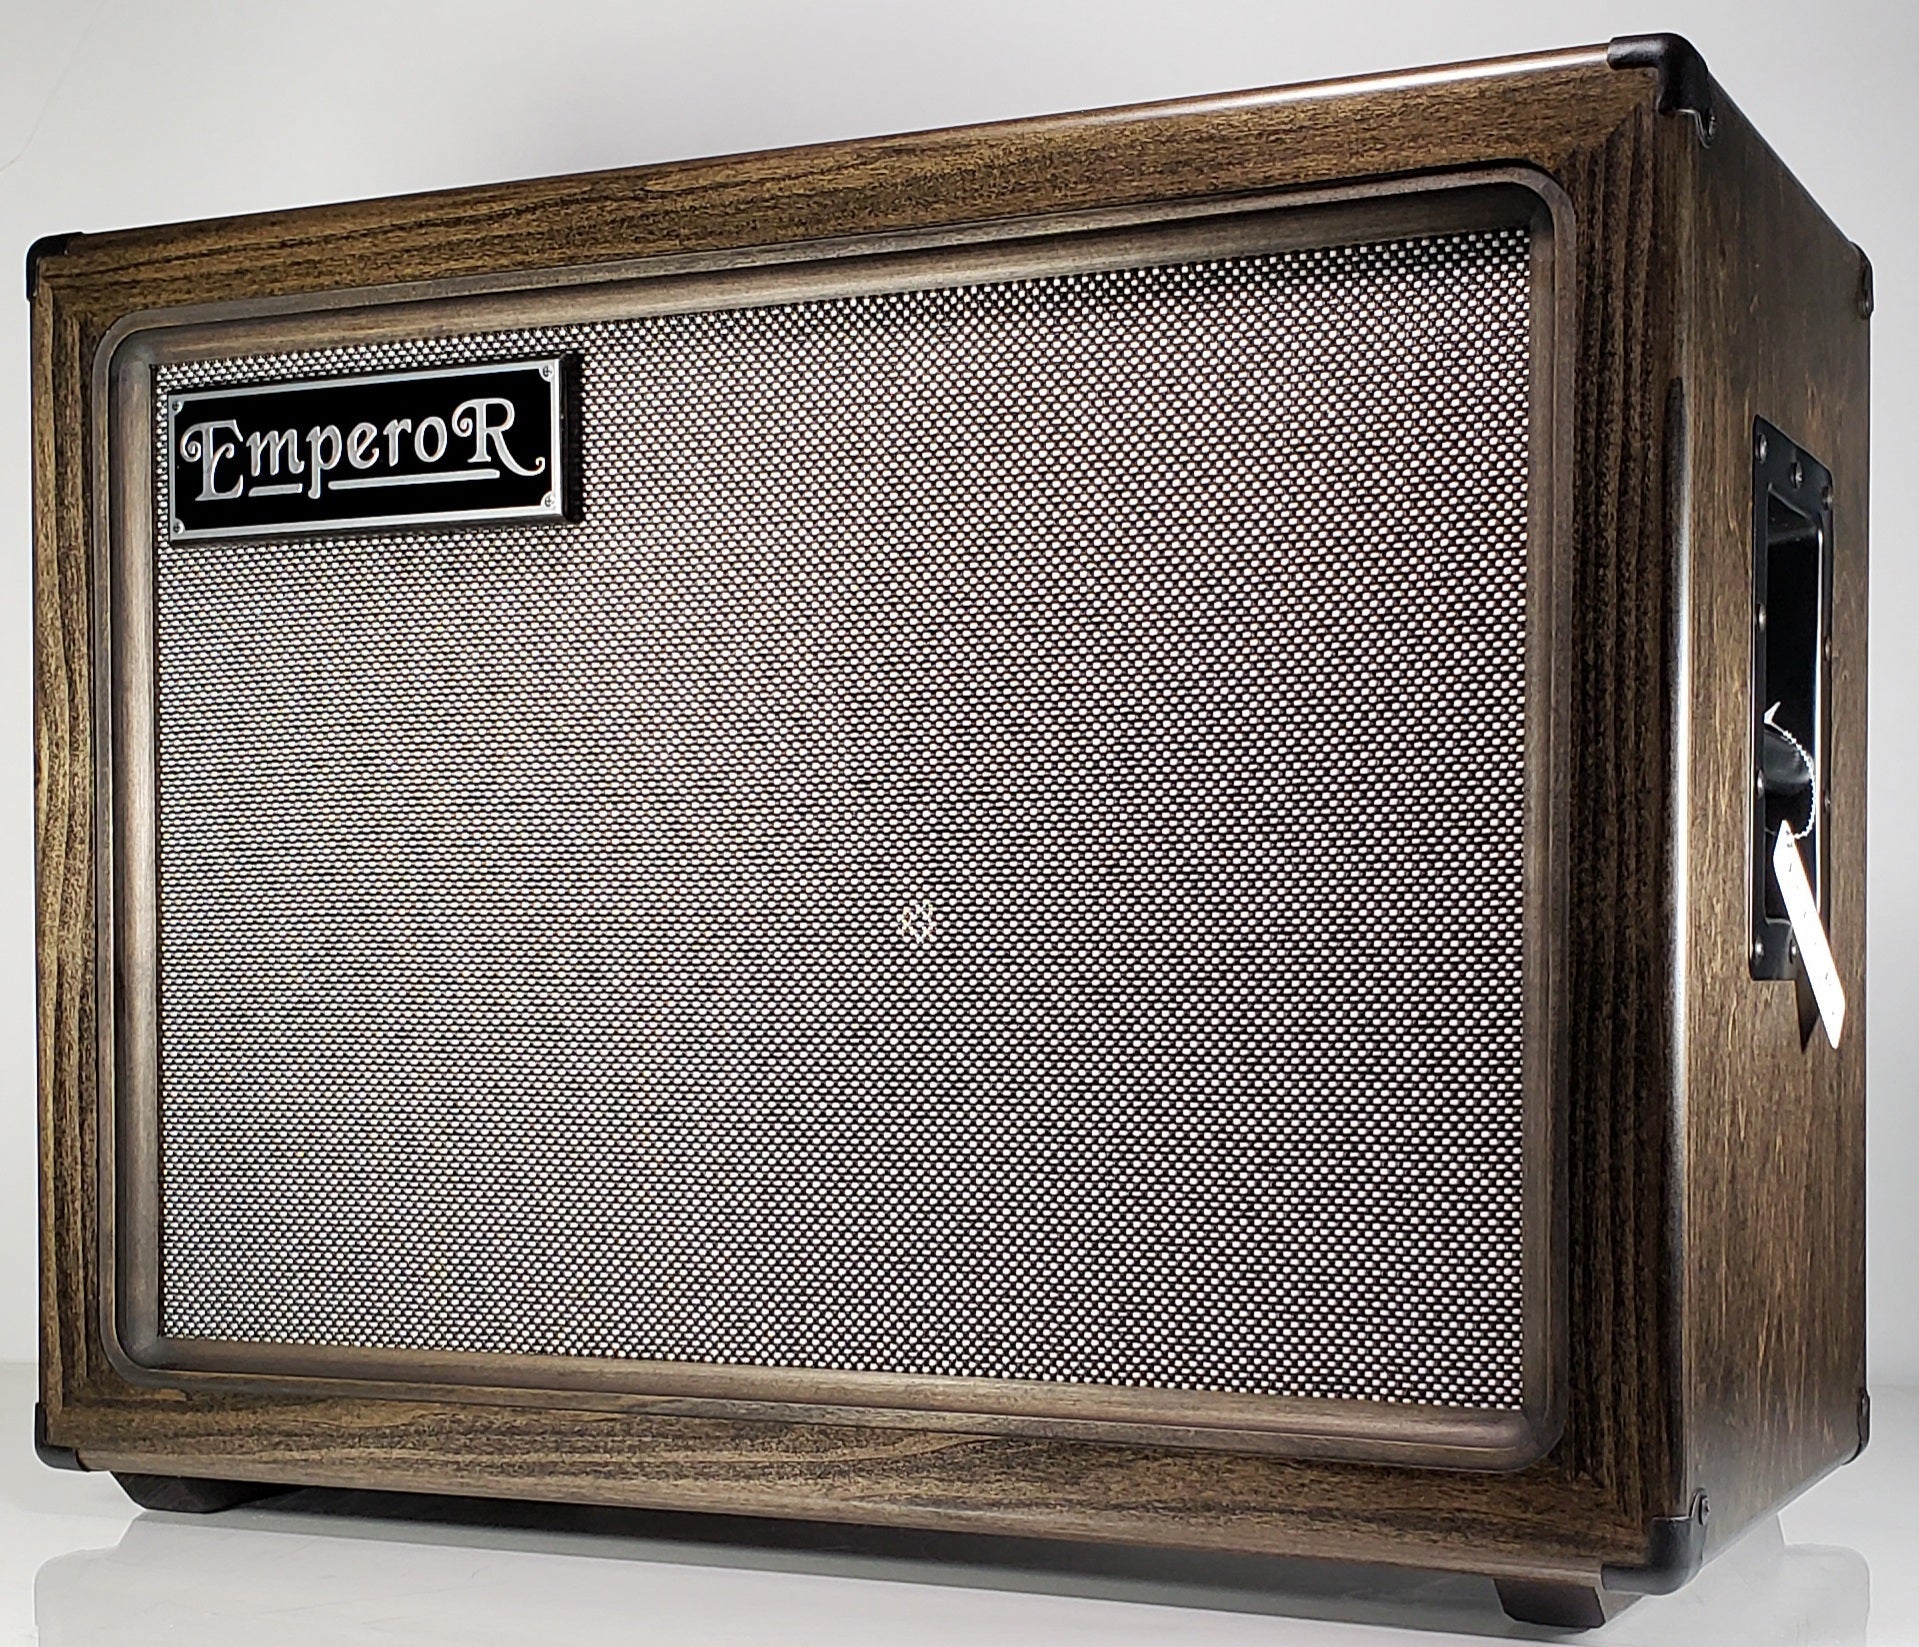 Standard 2x12 RS Guitar Cabinet - Emperor Cabinets